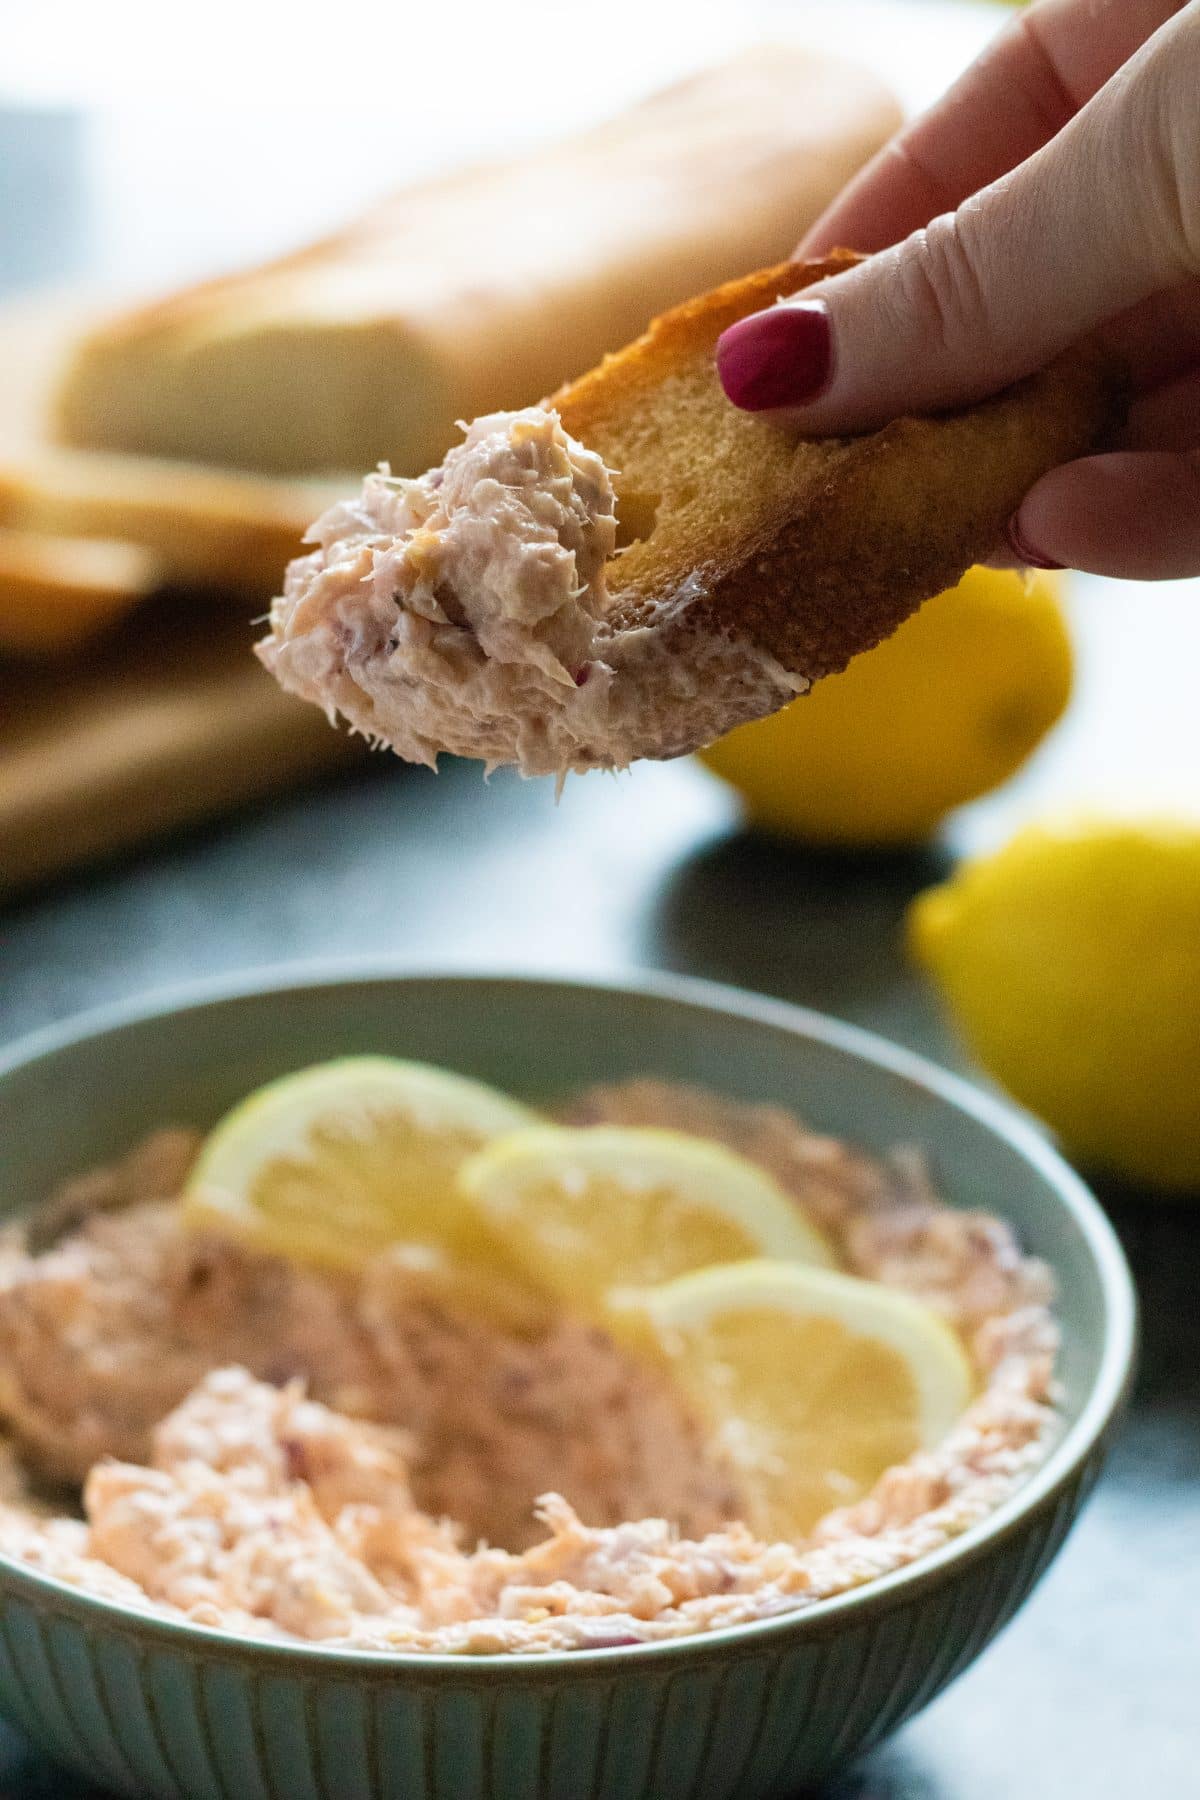 a piece of bread that has been dipped in hot smoked salmon pâté